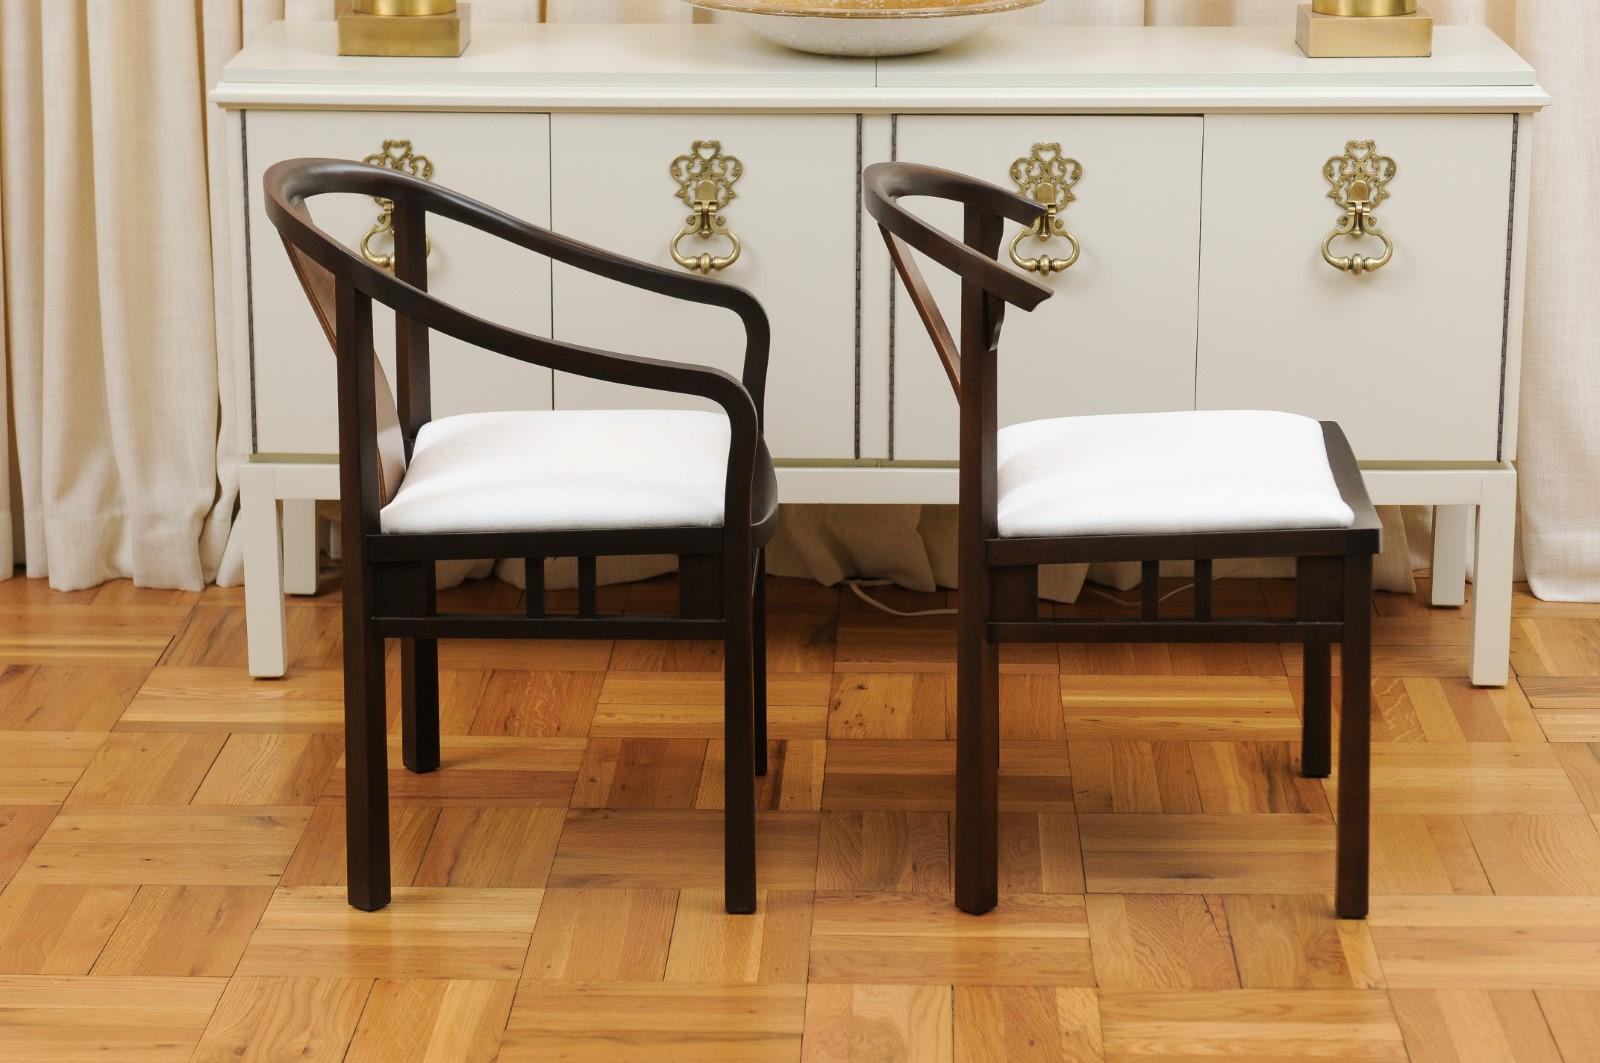 Incredible Set of 14 Rare Walnut Dining Chairs by Michael Taylor, circa 1955 In Excellent Condition For Sale In Atlanta, GA